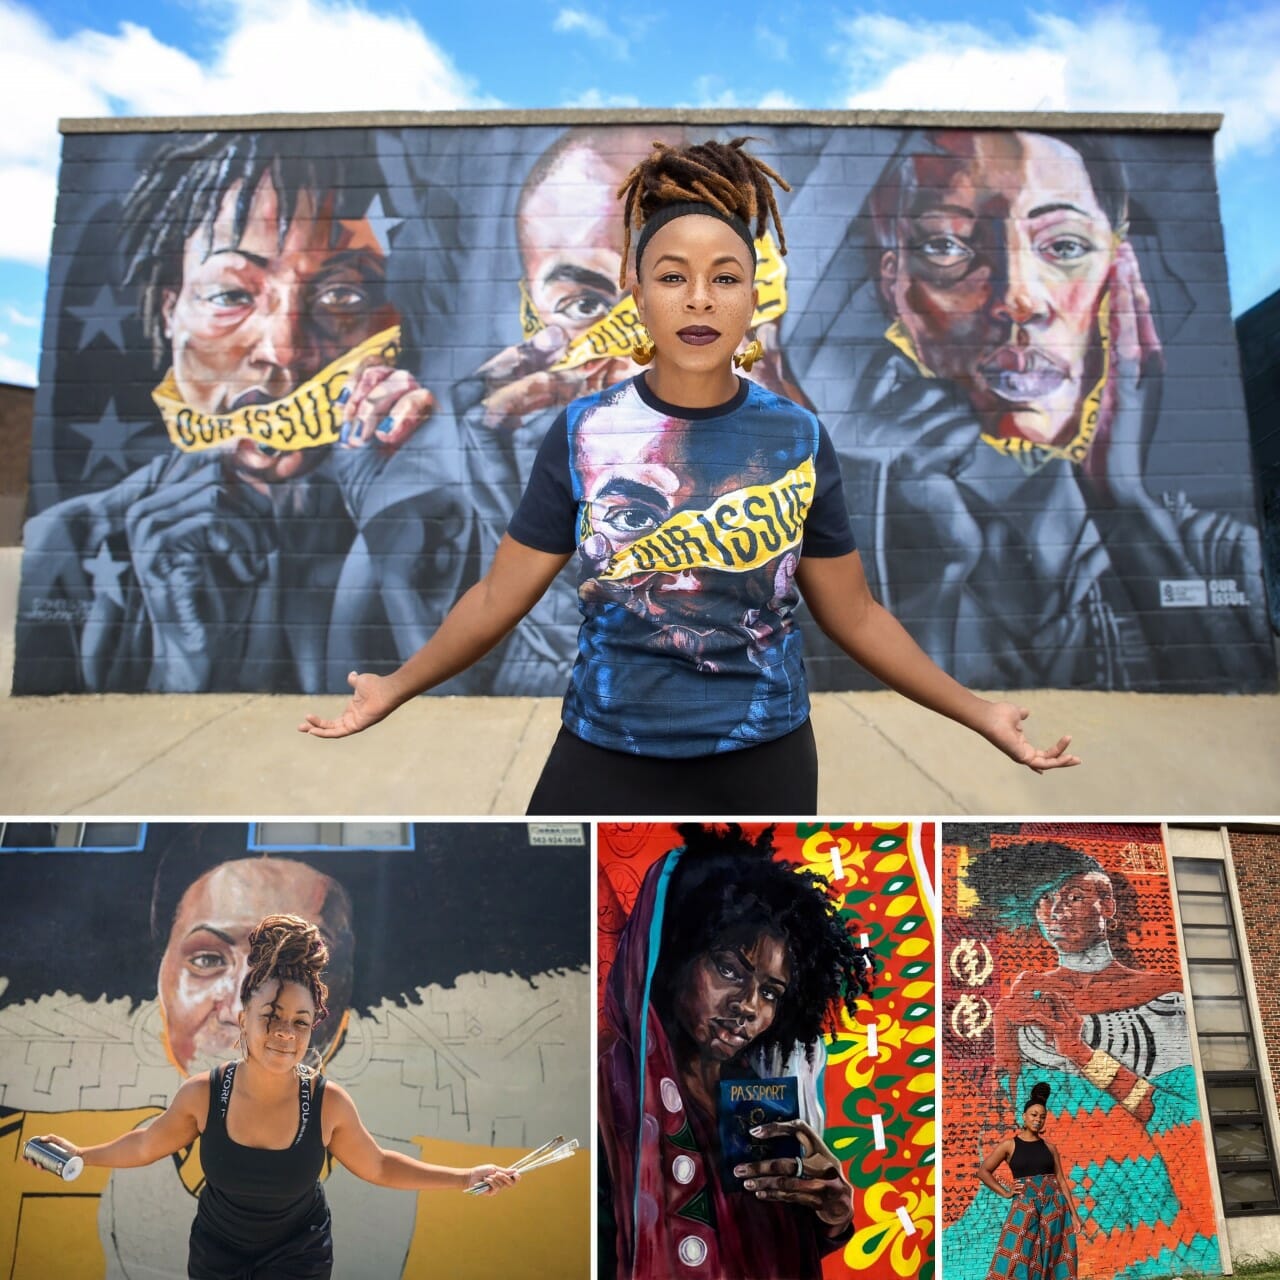 A black woman in an 'Our Issue' T-shirt in front of a mural, and in front of another mural with a paint can and brushes.